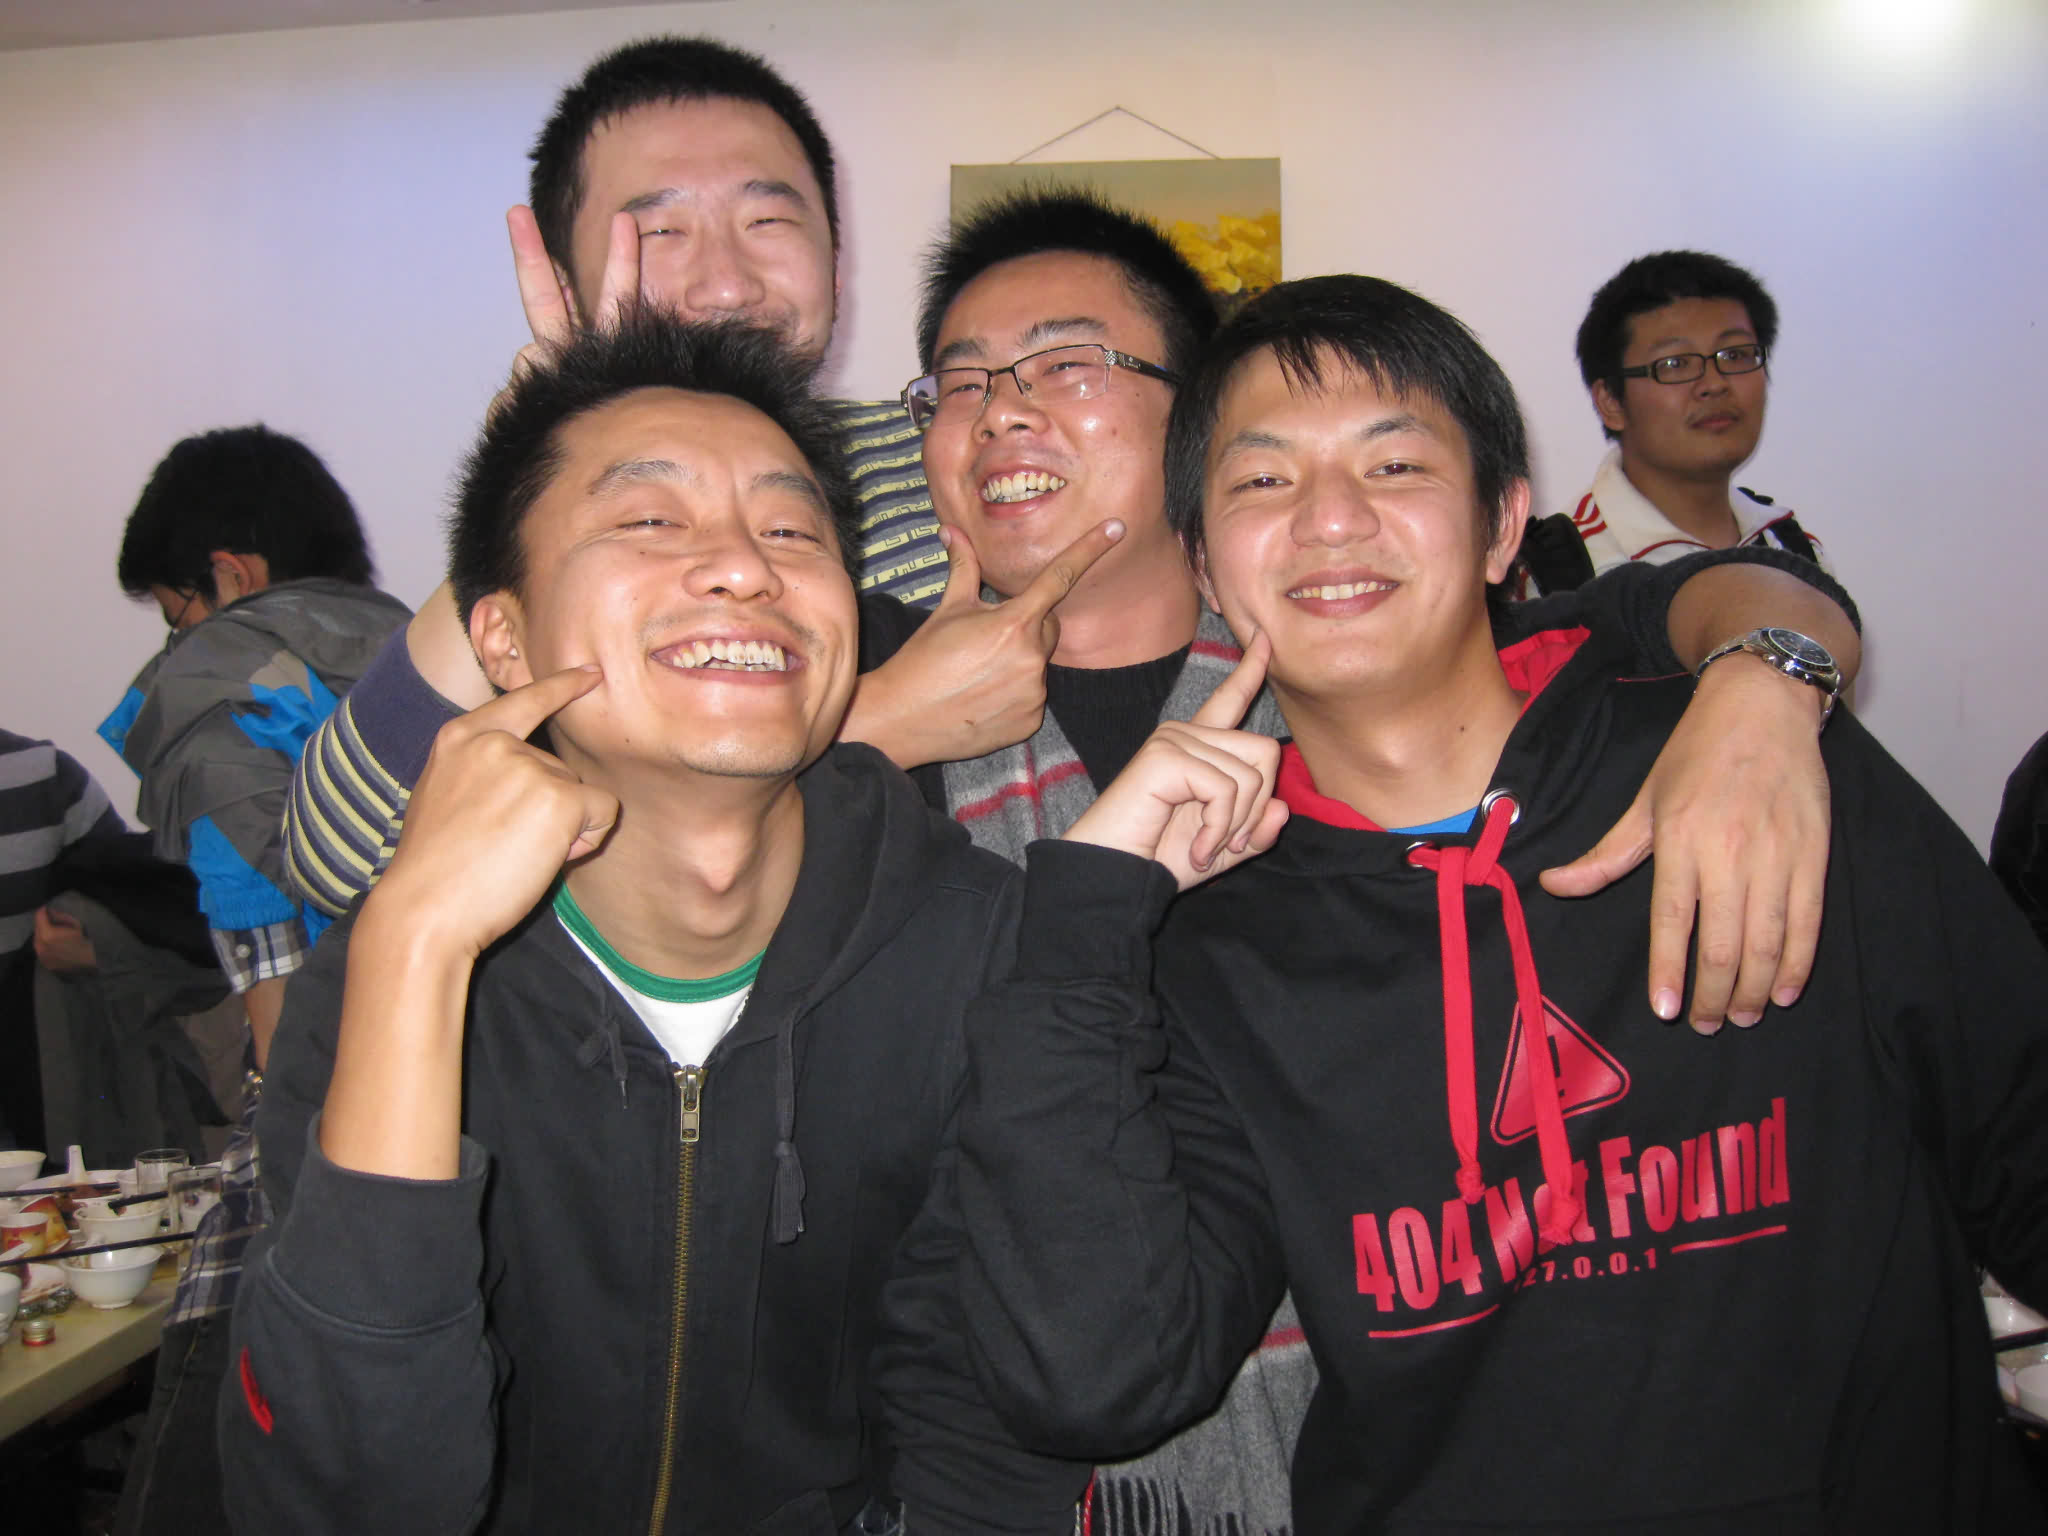 a group of young people are smiling together